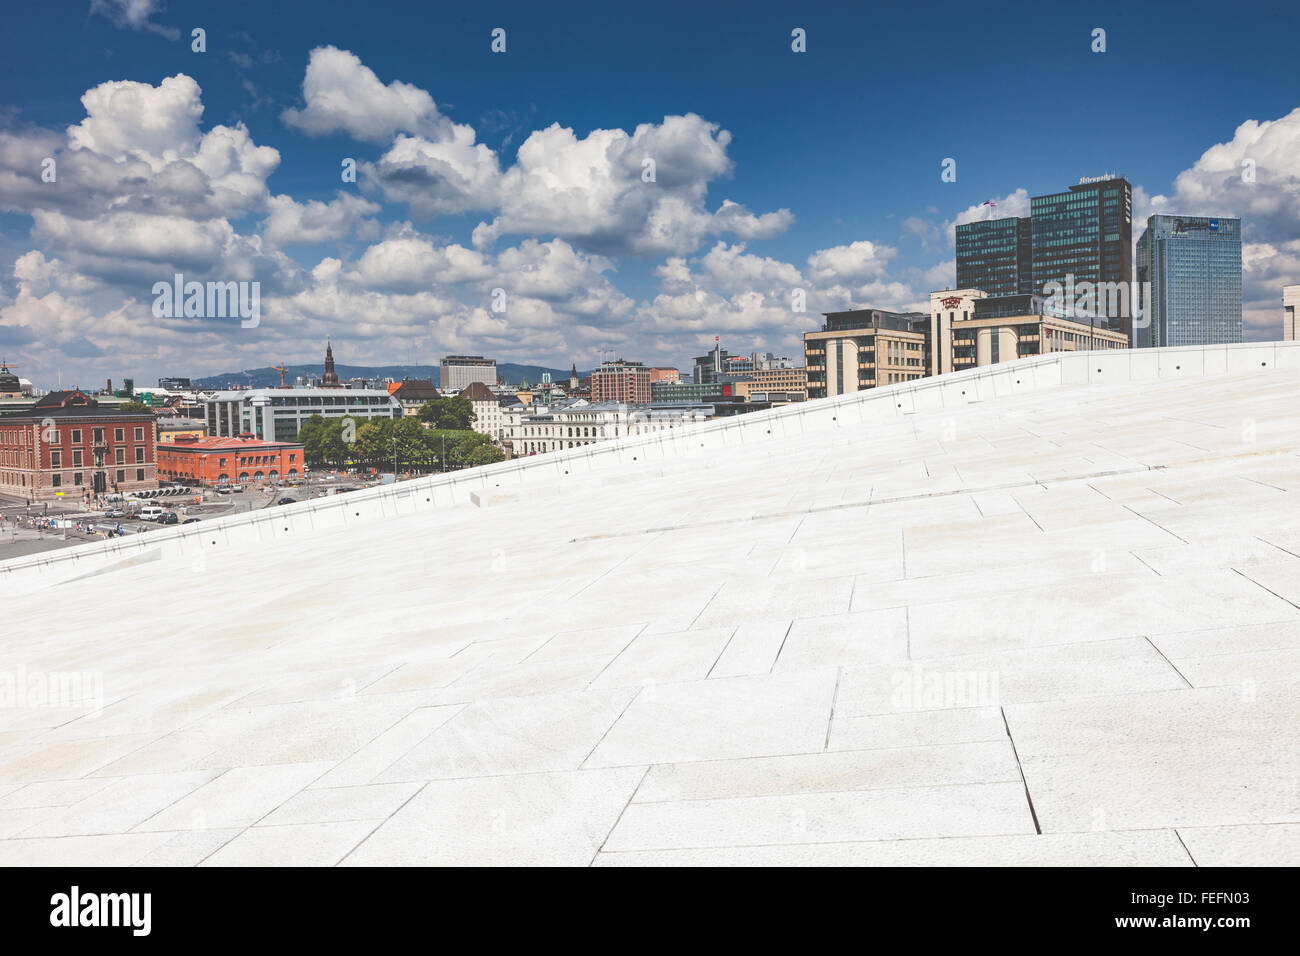 OSLO, NORWAY - JULY 09: View on a side of the National Oslo Opera House on July 09, 2014 in Oslo, Norway Stock Photo